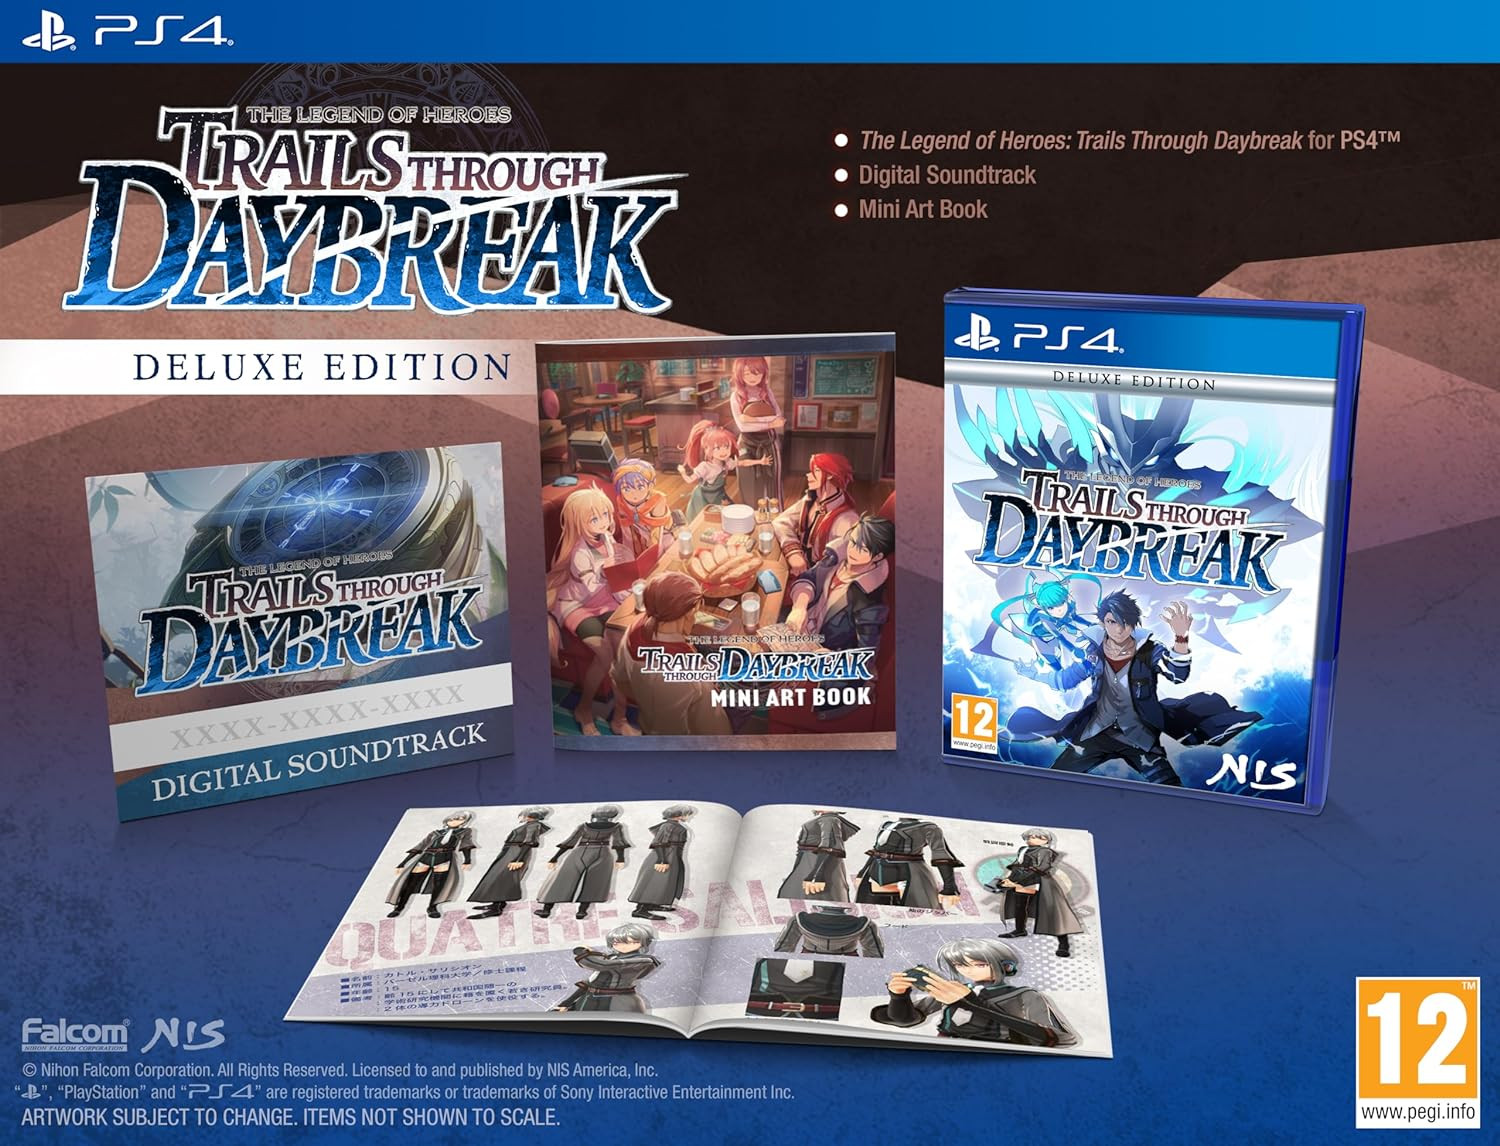 The Legend of Heroes: Trails Through Daybreak - Deluxe Edition (PS4), NIS America